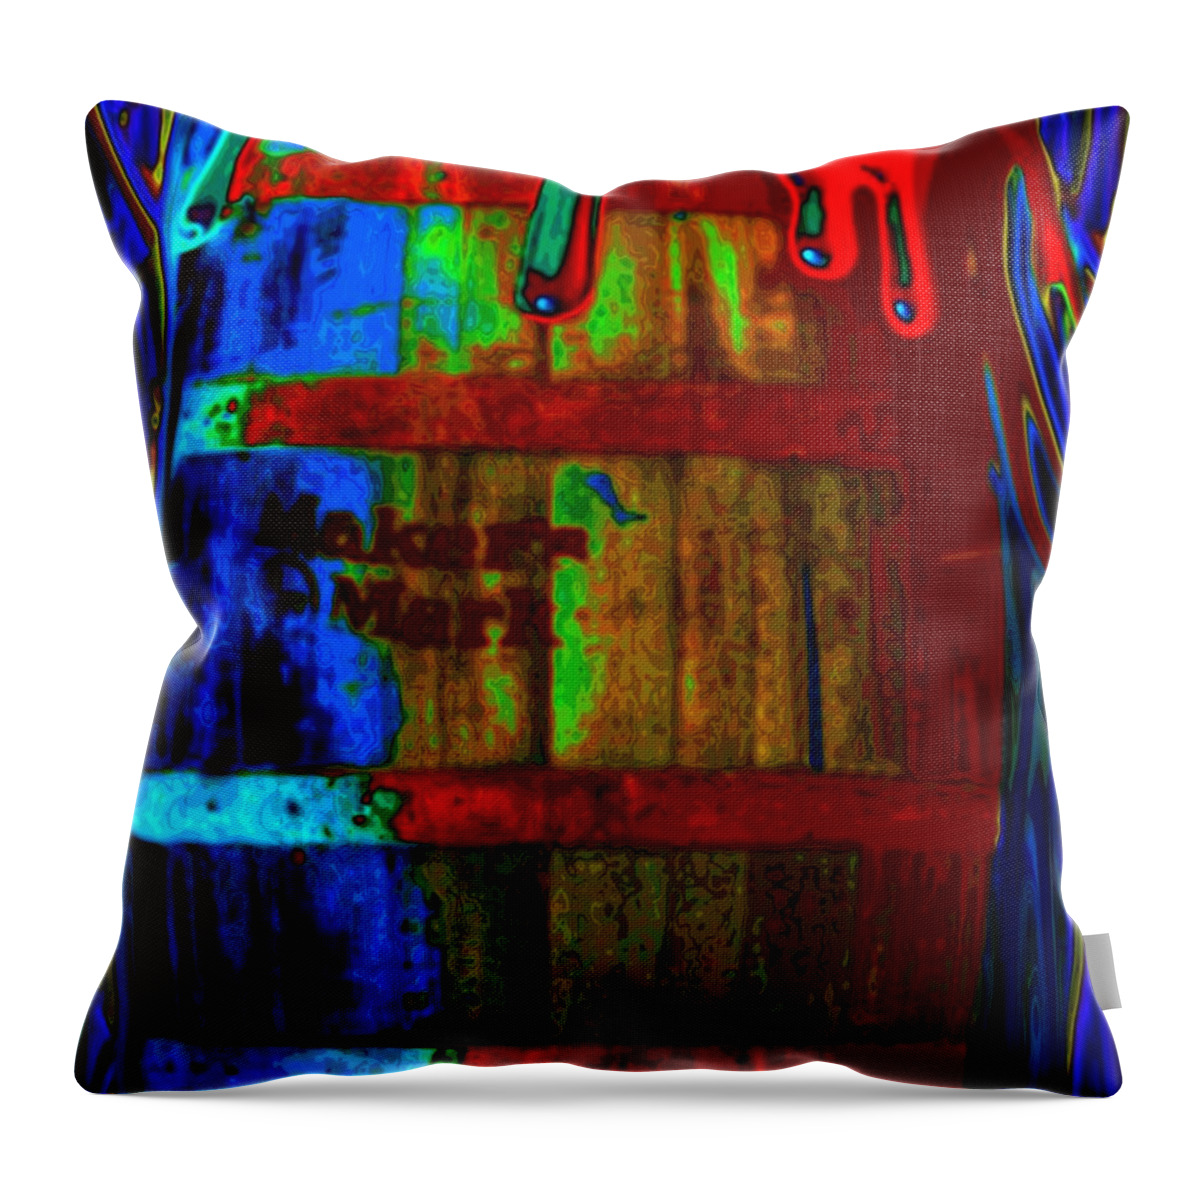 Whiskey Throw Pillow featuring the digital art Whiskey A Go Go by Alec Drake